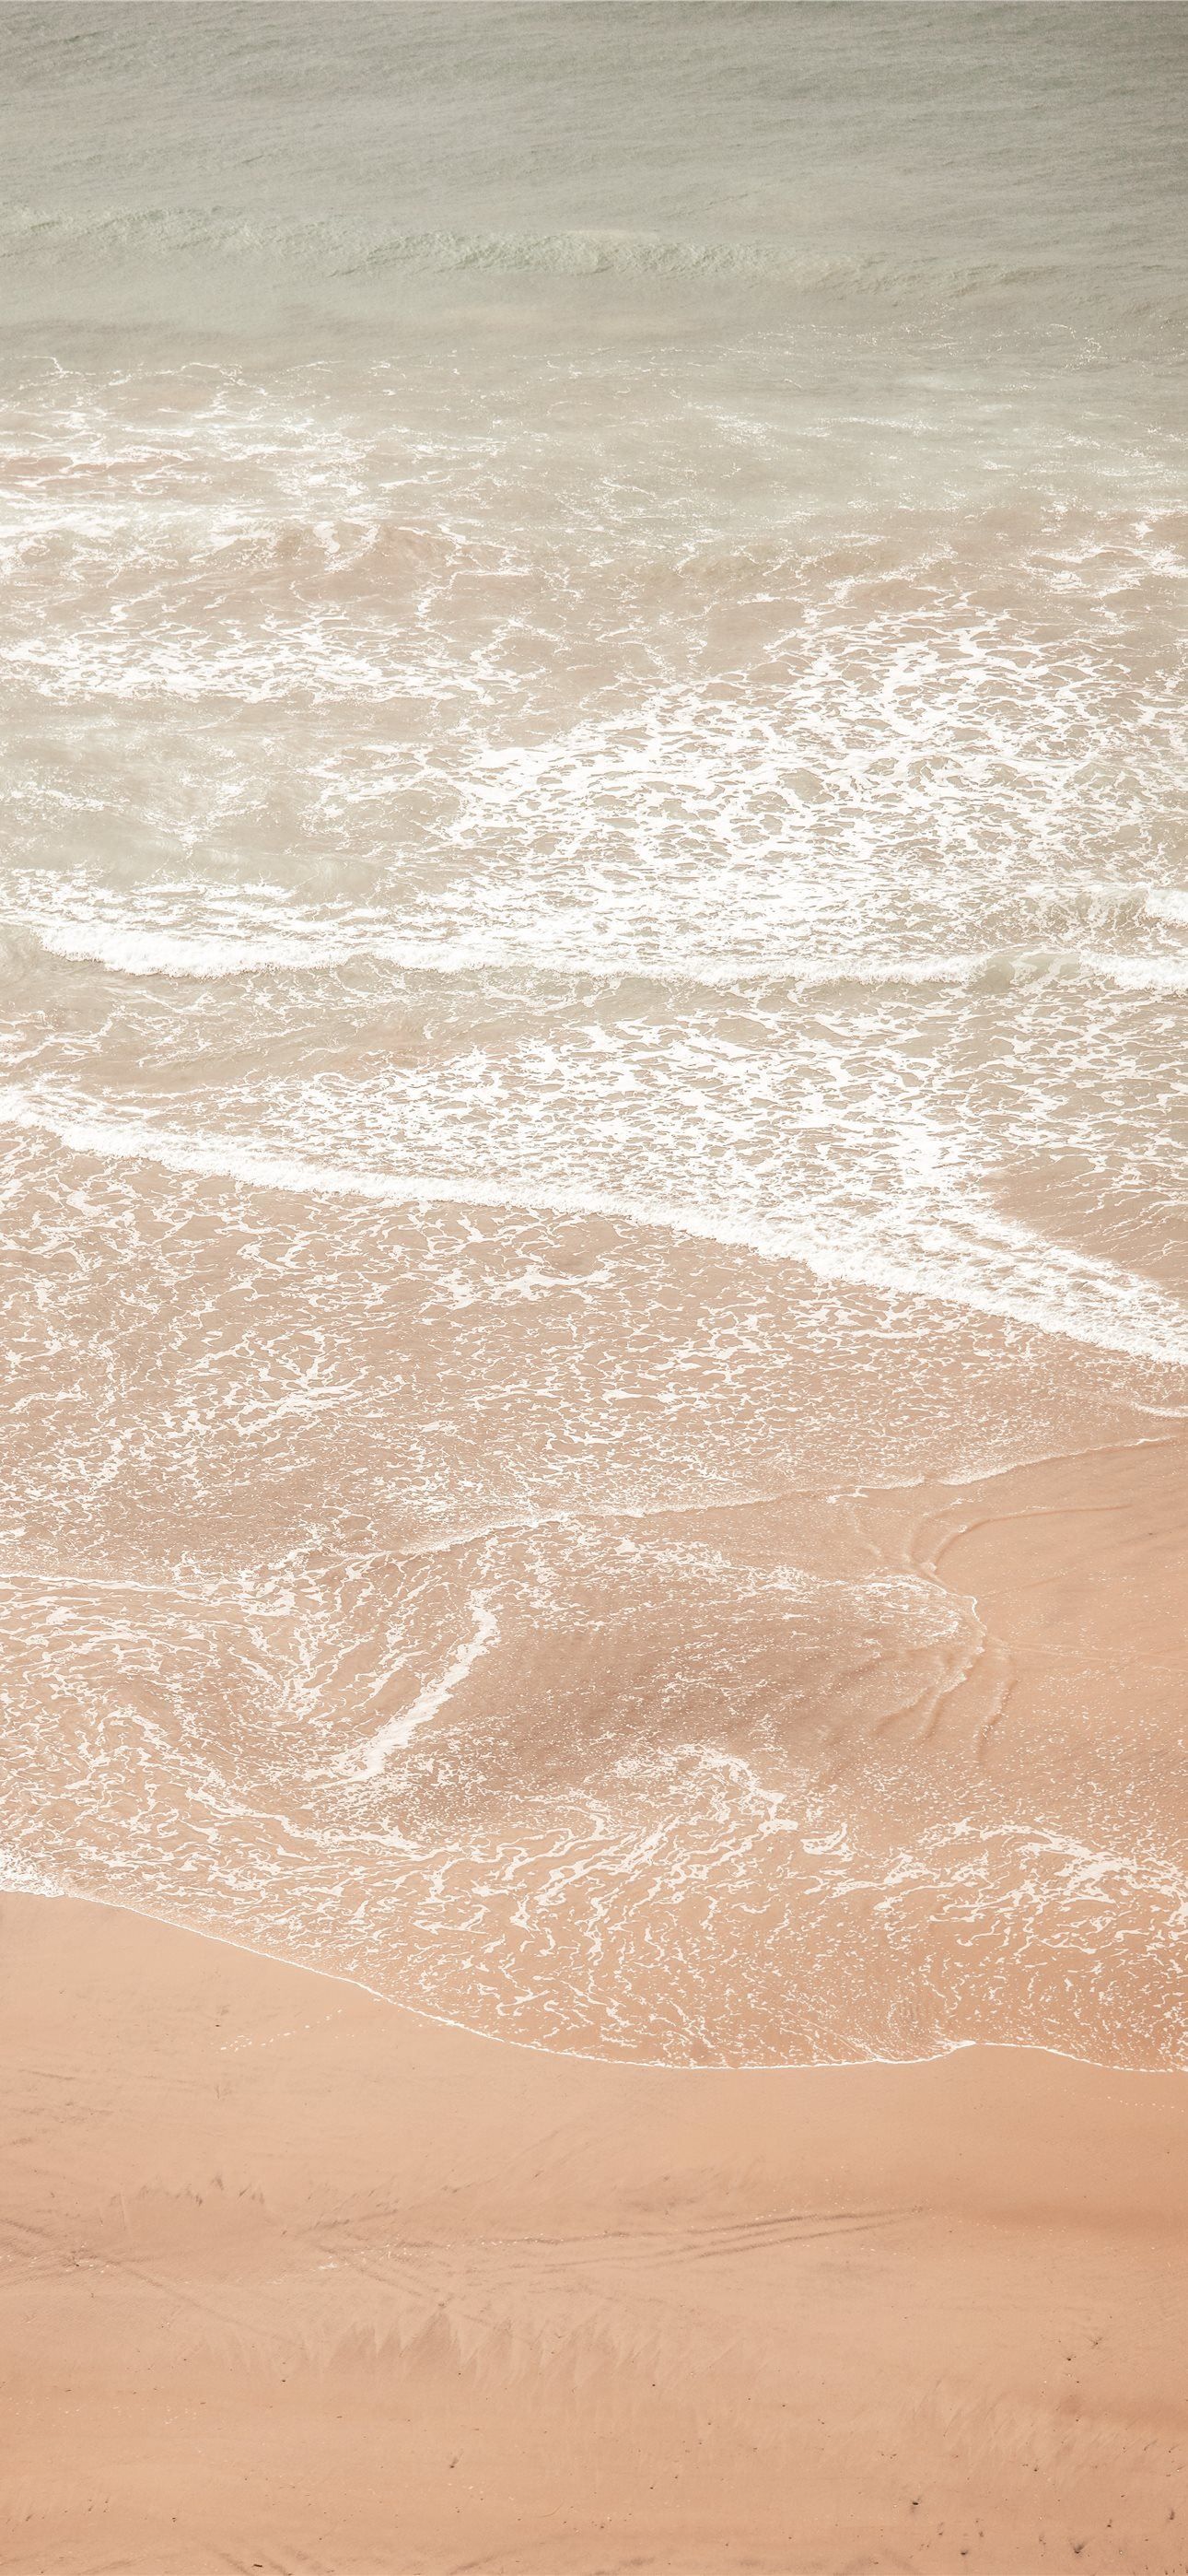 brown sand near body of water during daytime iPhone Wallpaper Free Download